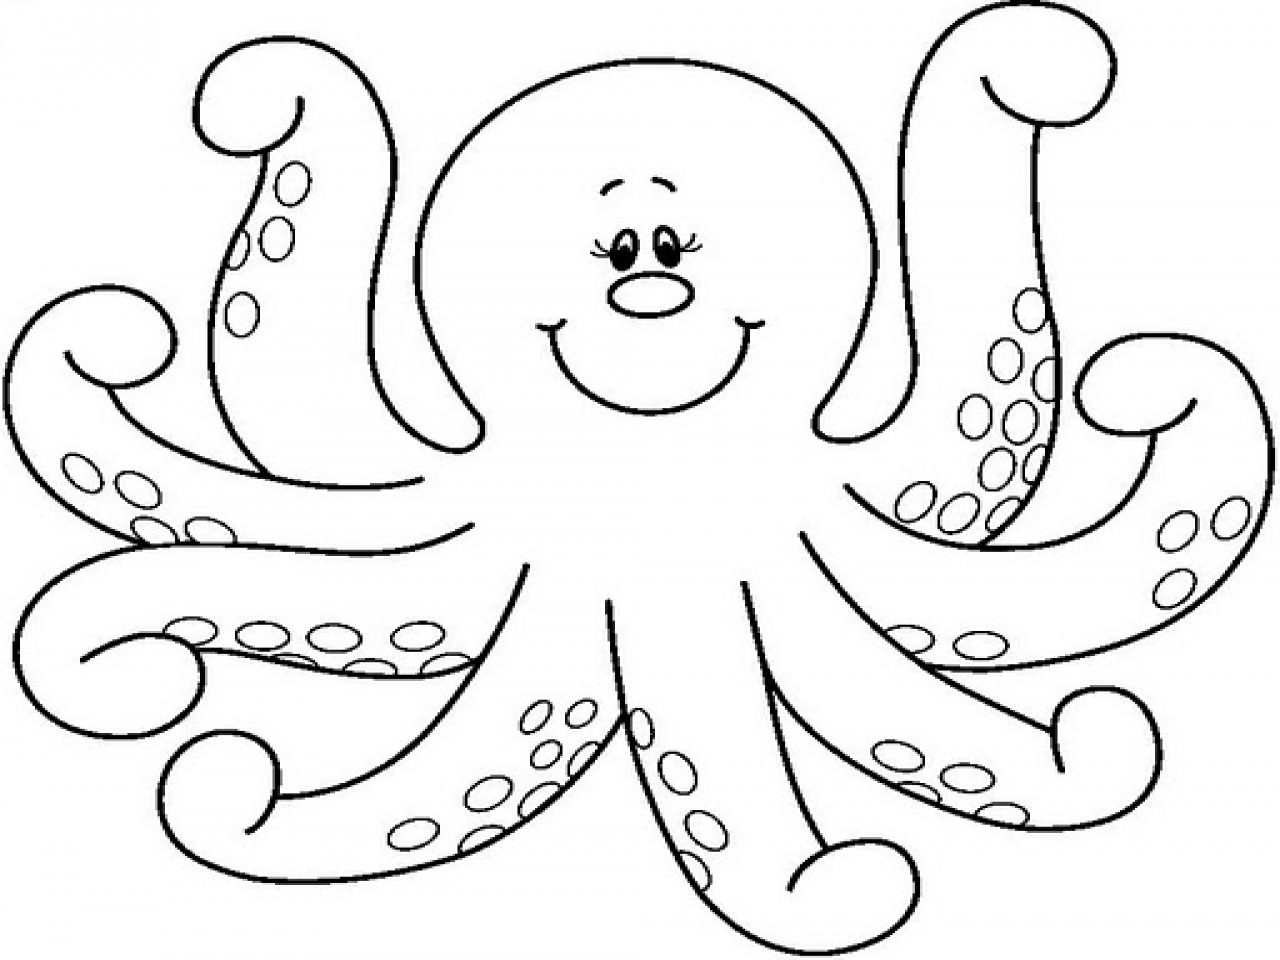 Octopus clipart, Octopus Transparent FREE for download on ...